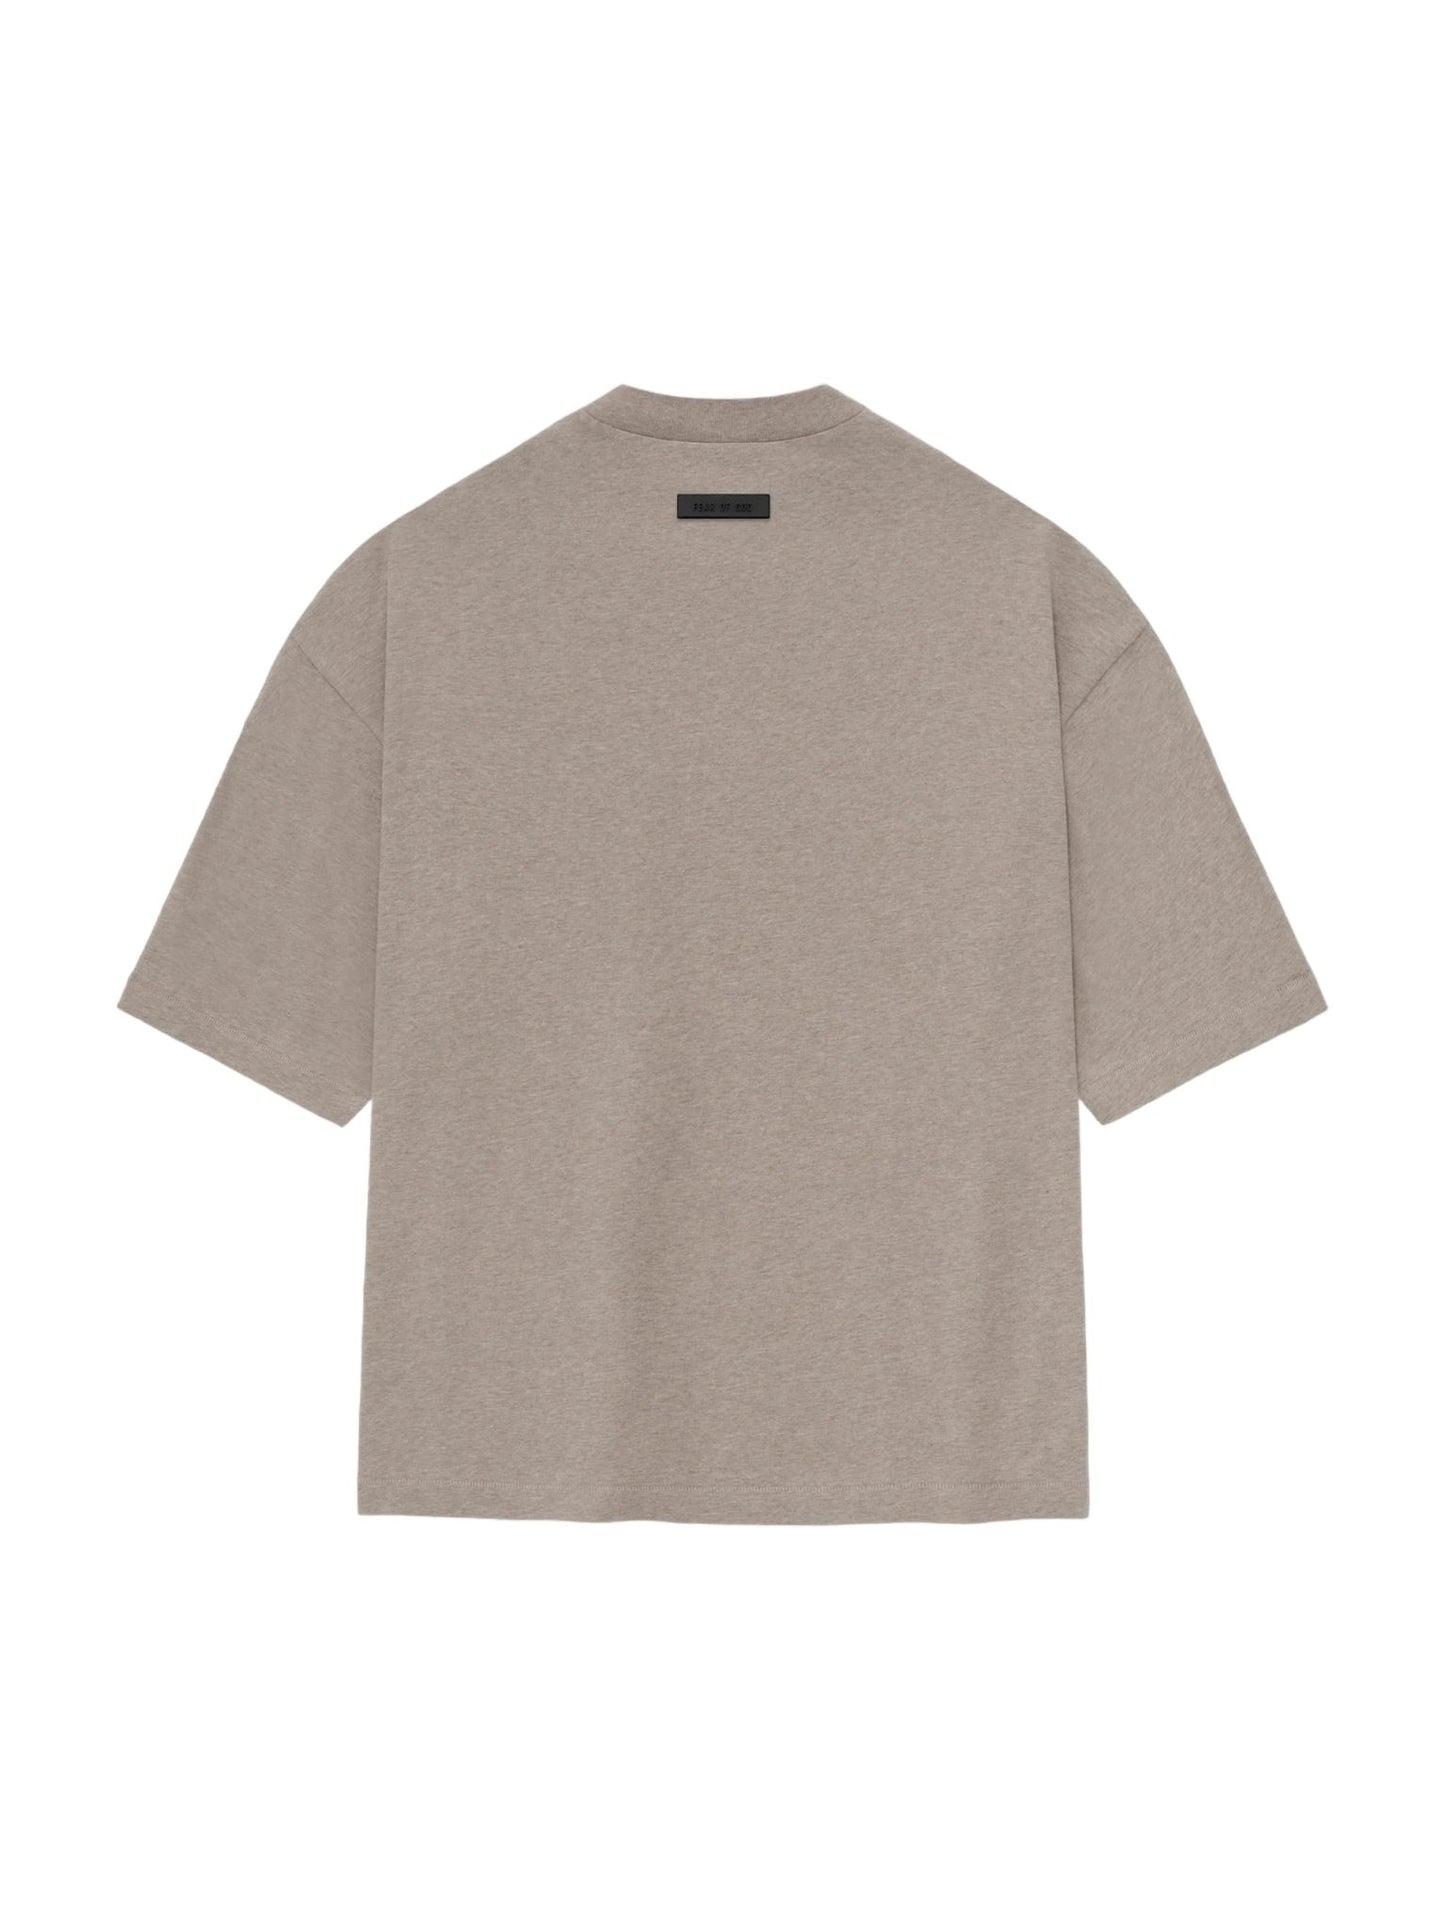 Fear of God Essentials T-shirt Core Heather - Supra Sneakers